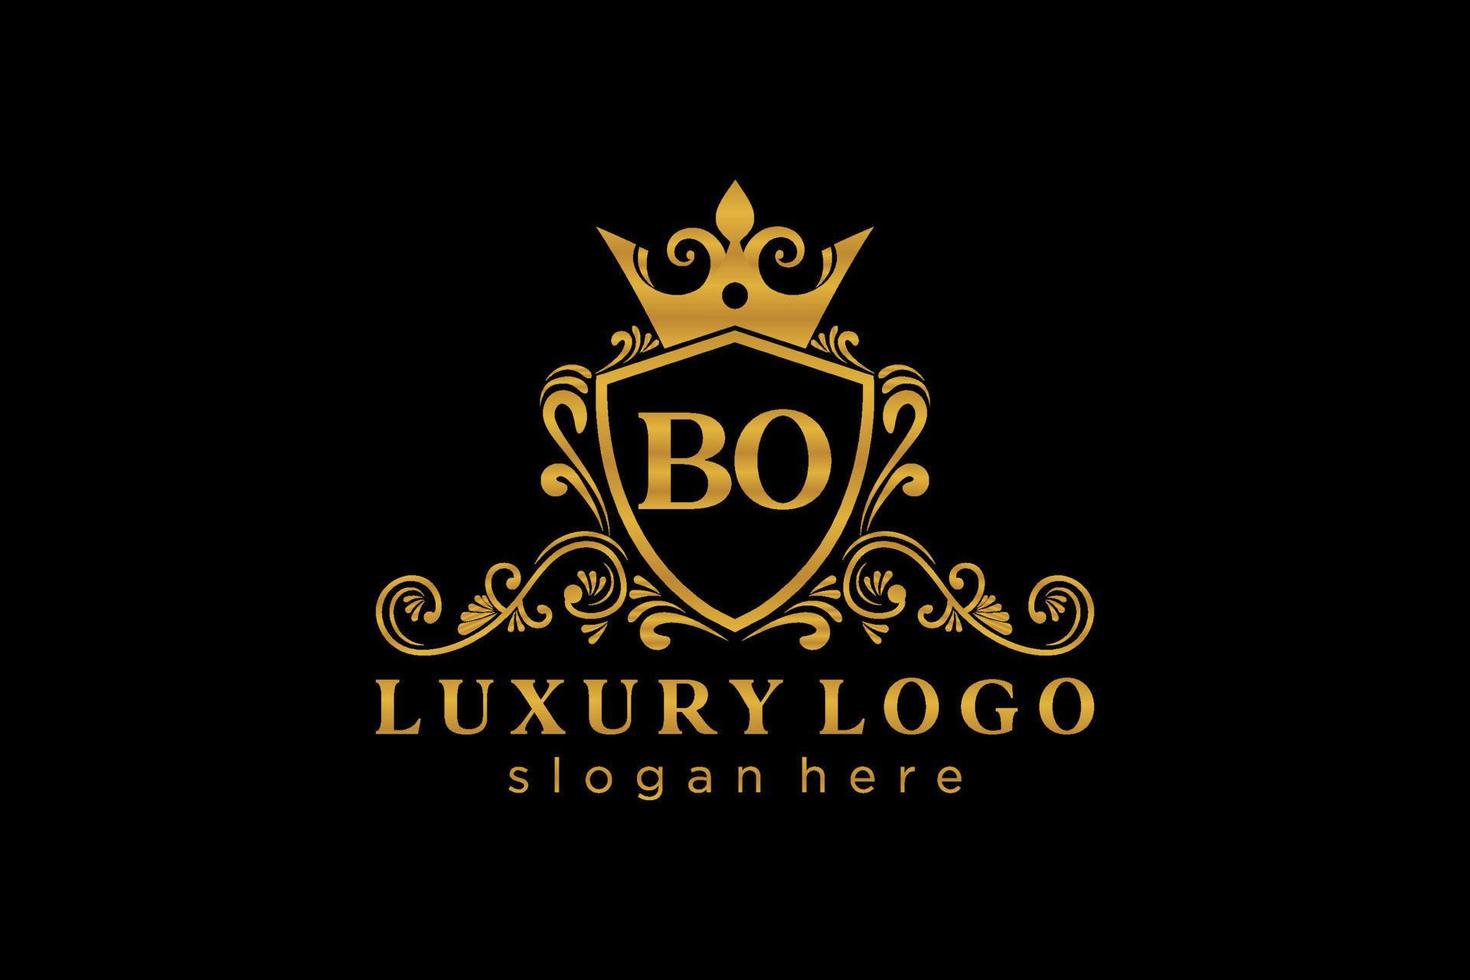 Initial BO Letter Royal Luxury Logo template in vector art for Restaurant, Royalty, Boutique, Cafe, Hotel, Heraldic, Jewelry, Fashion and other vector illustration.